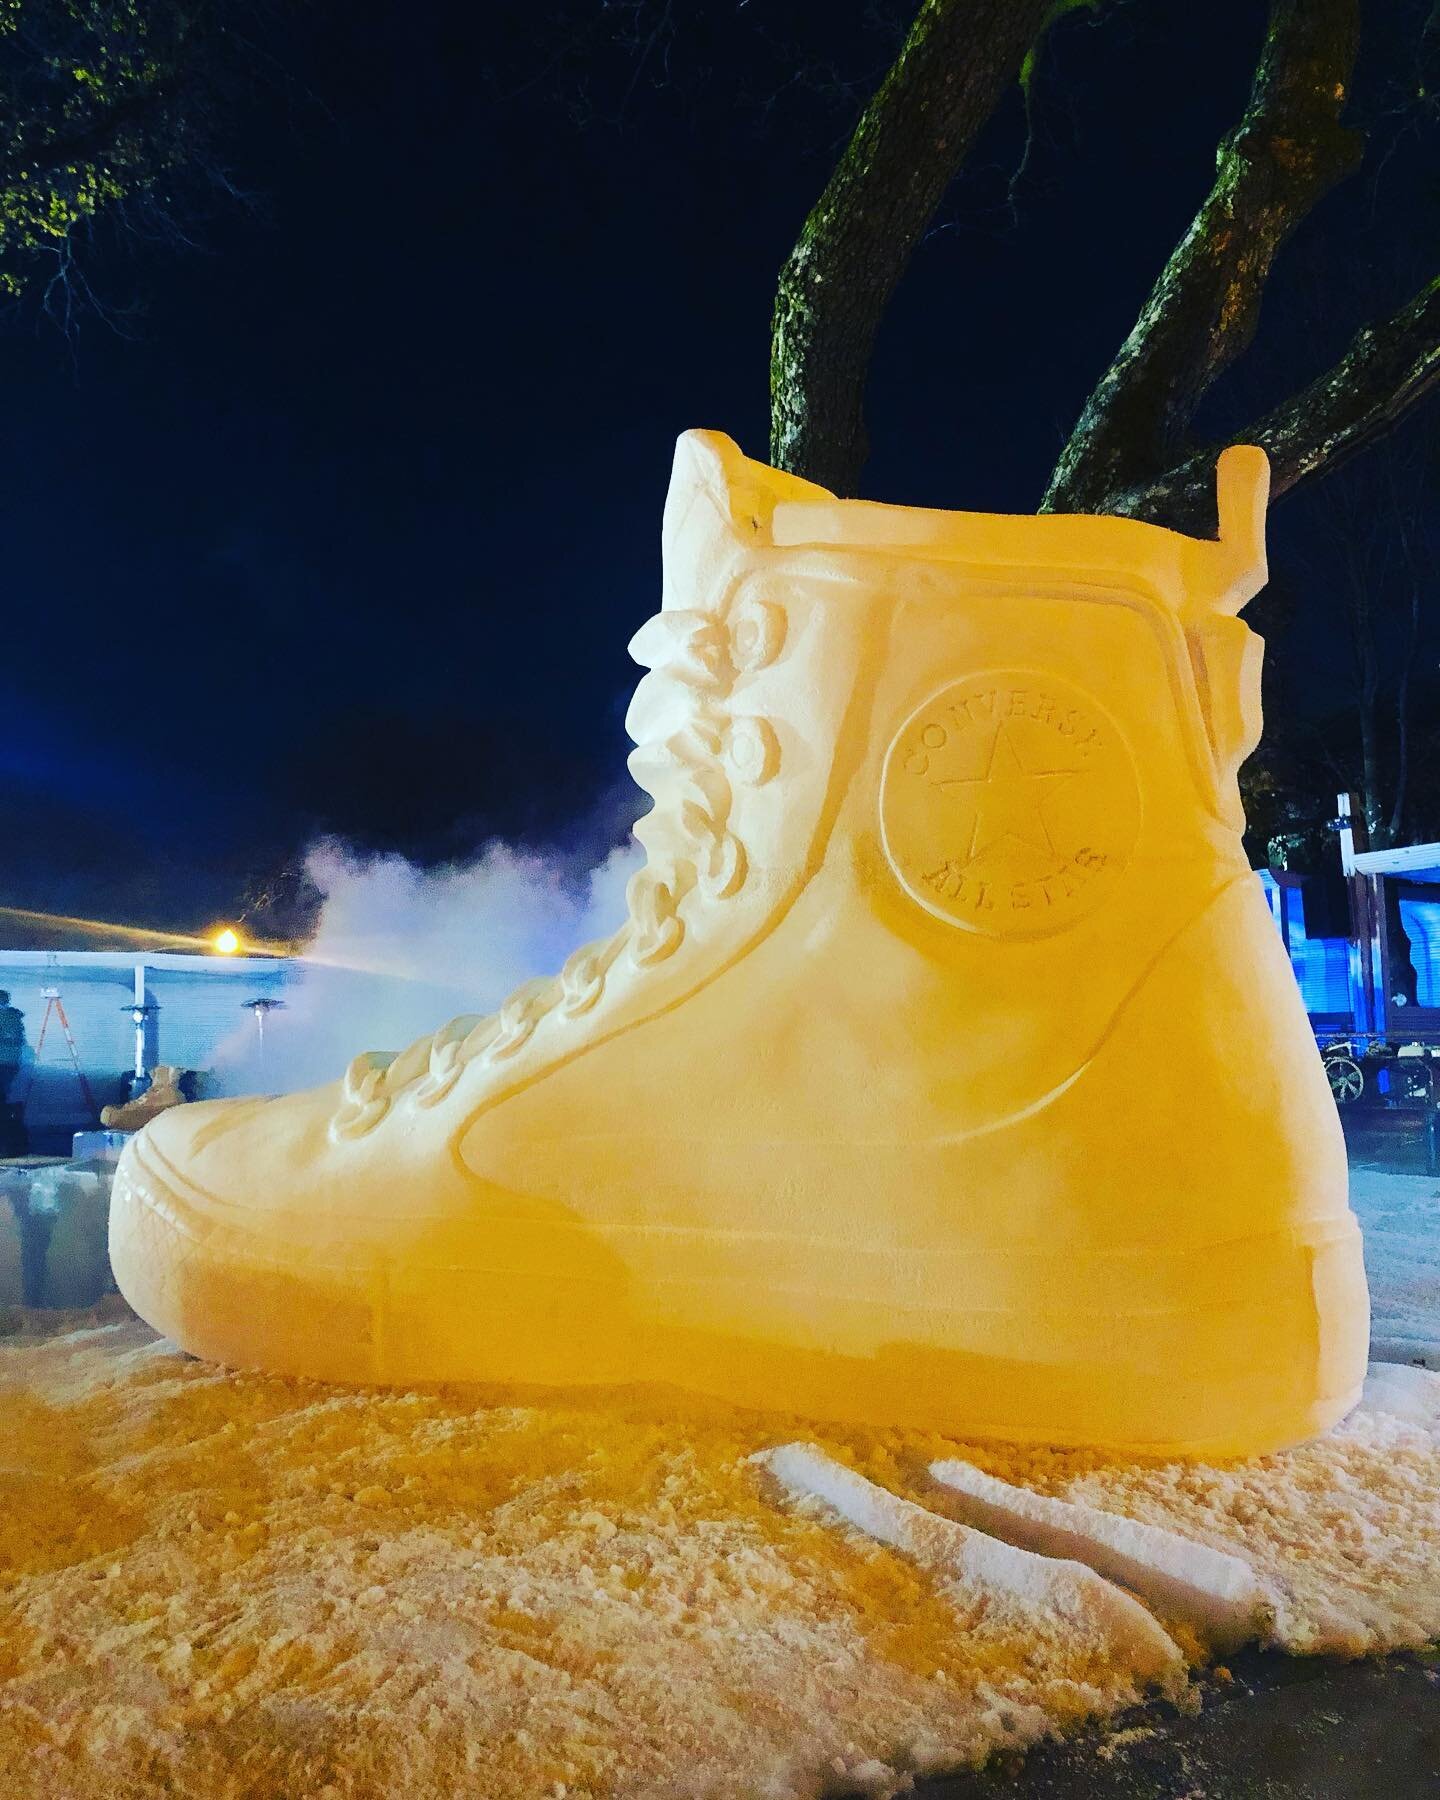 We had the pleasure of making various pieces for the @converse boot launch party in November including this huge foam sculpt by @iguanaksu. We also provided lots and lots of snow ❄️

@lbfancy #converse